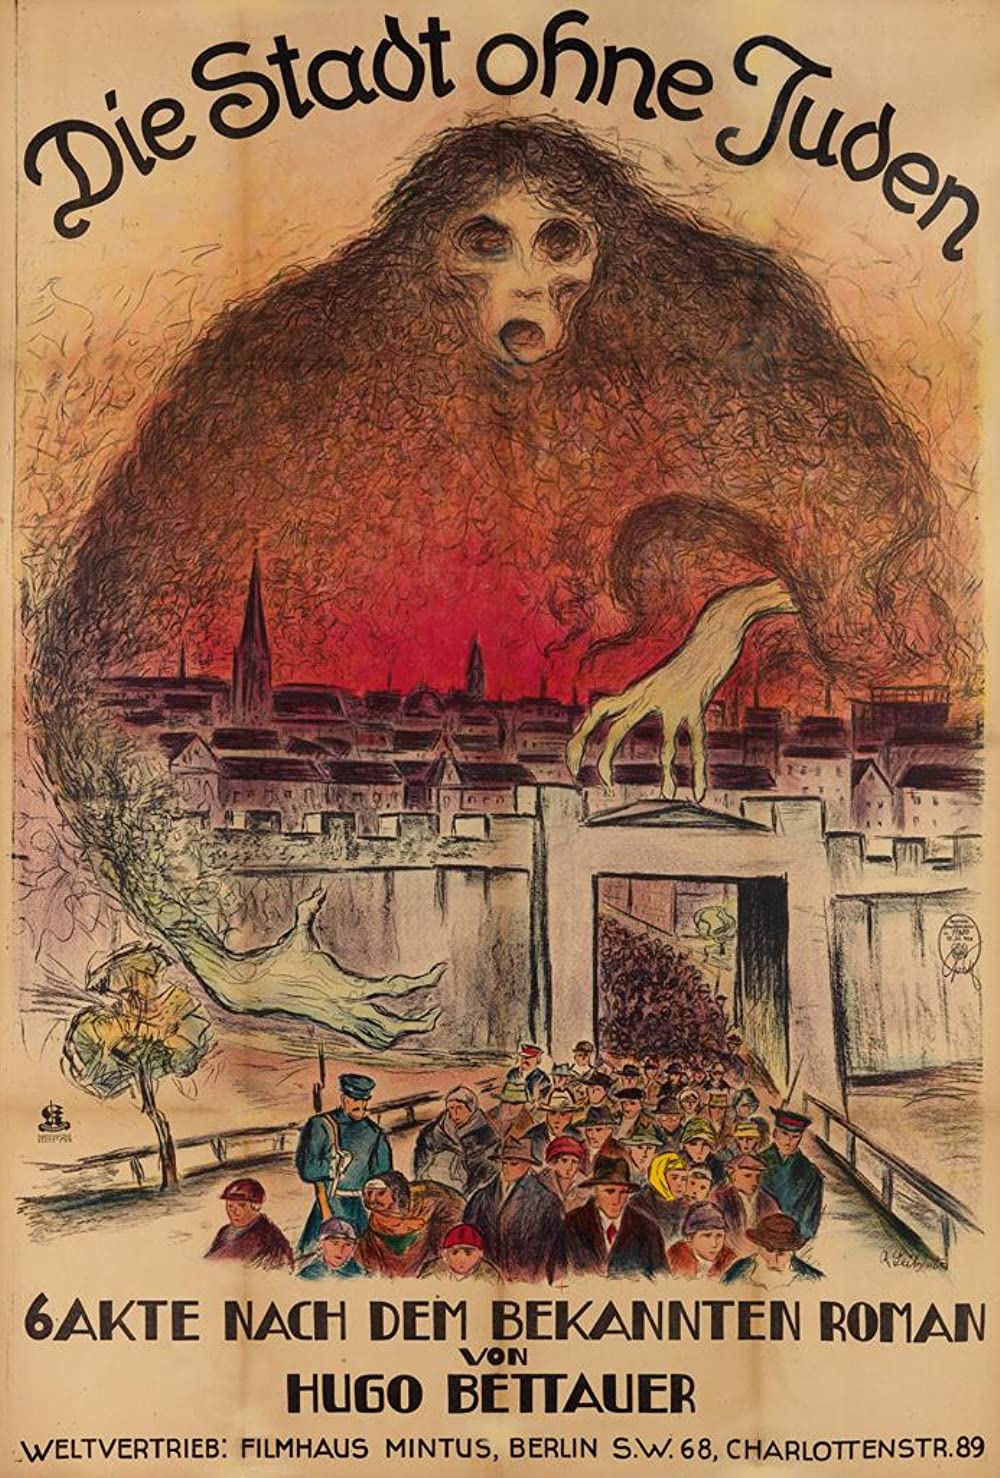 Film poster for CITY WITHOUT JEWS (1924)